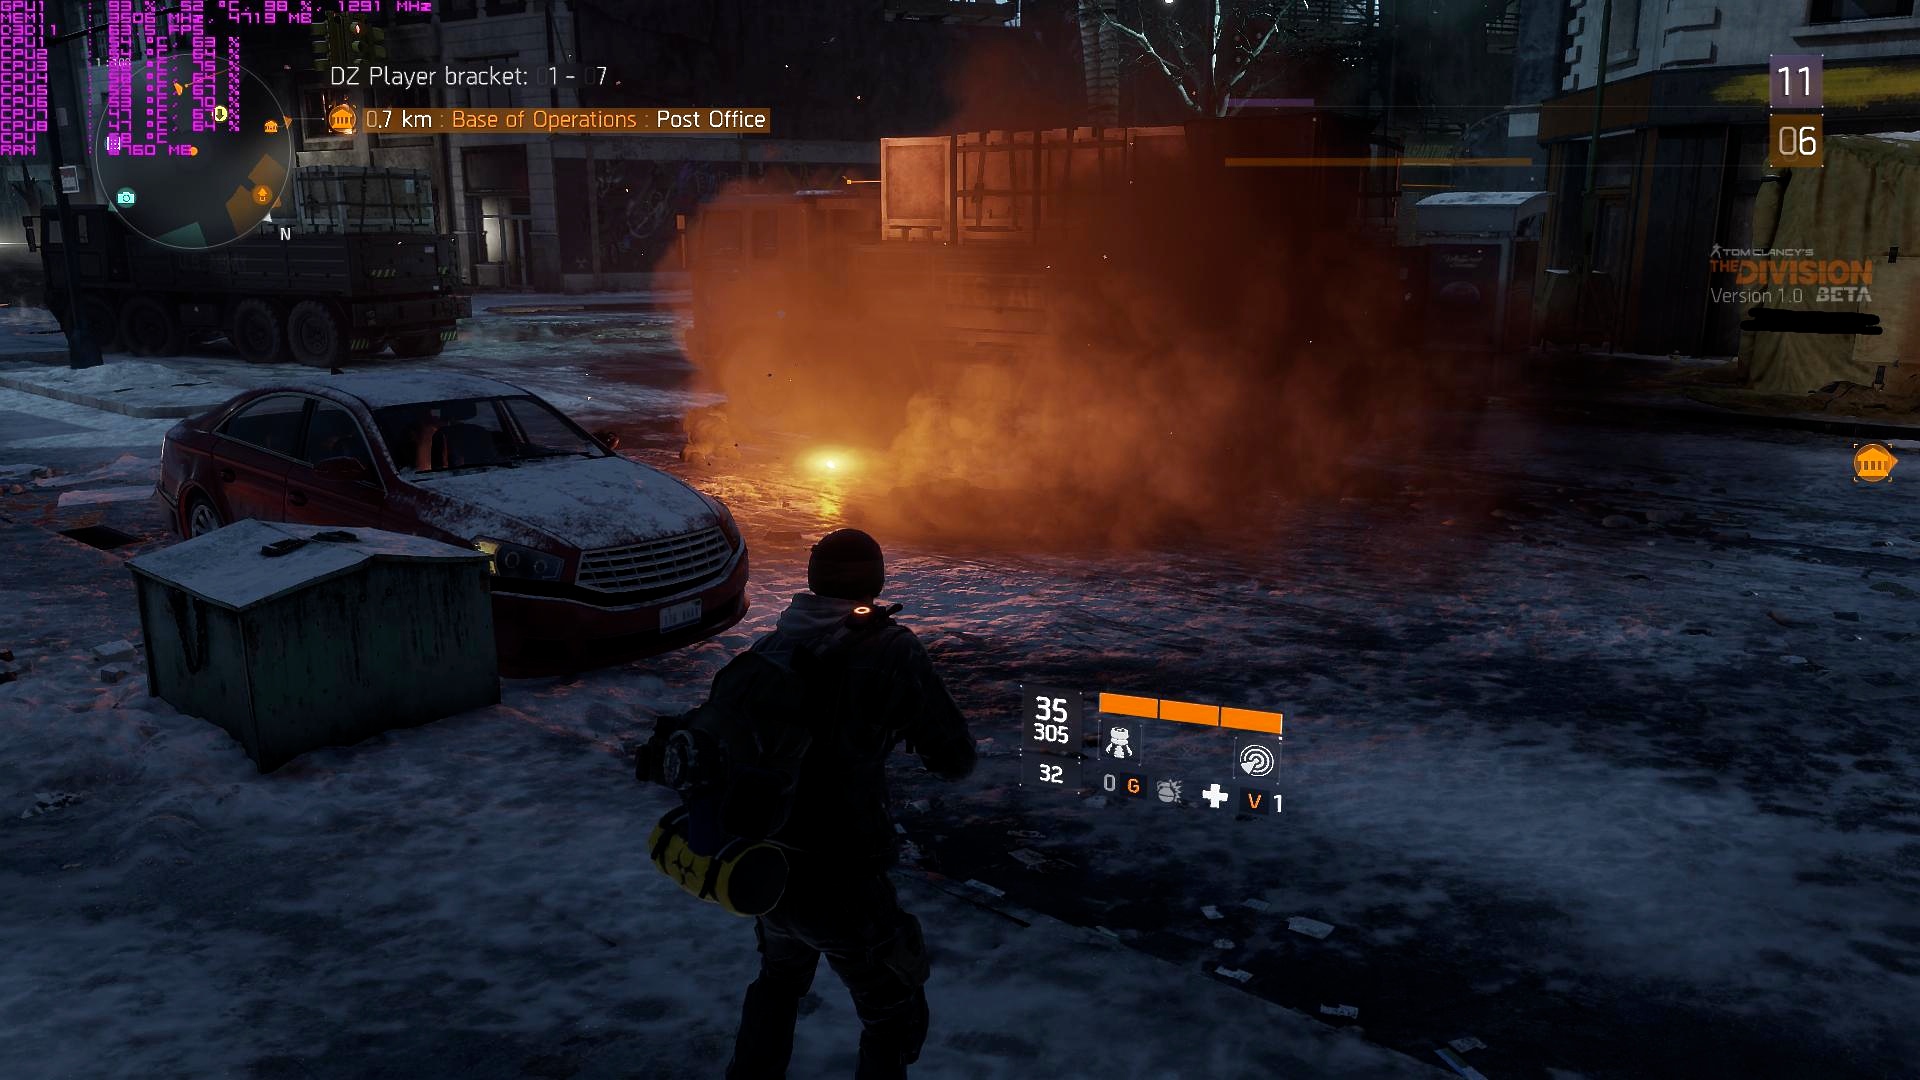 The Division PC Screenshots, Max settings with HBAO+